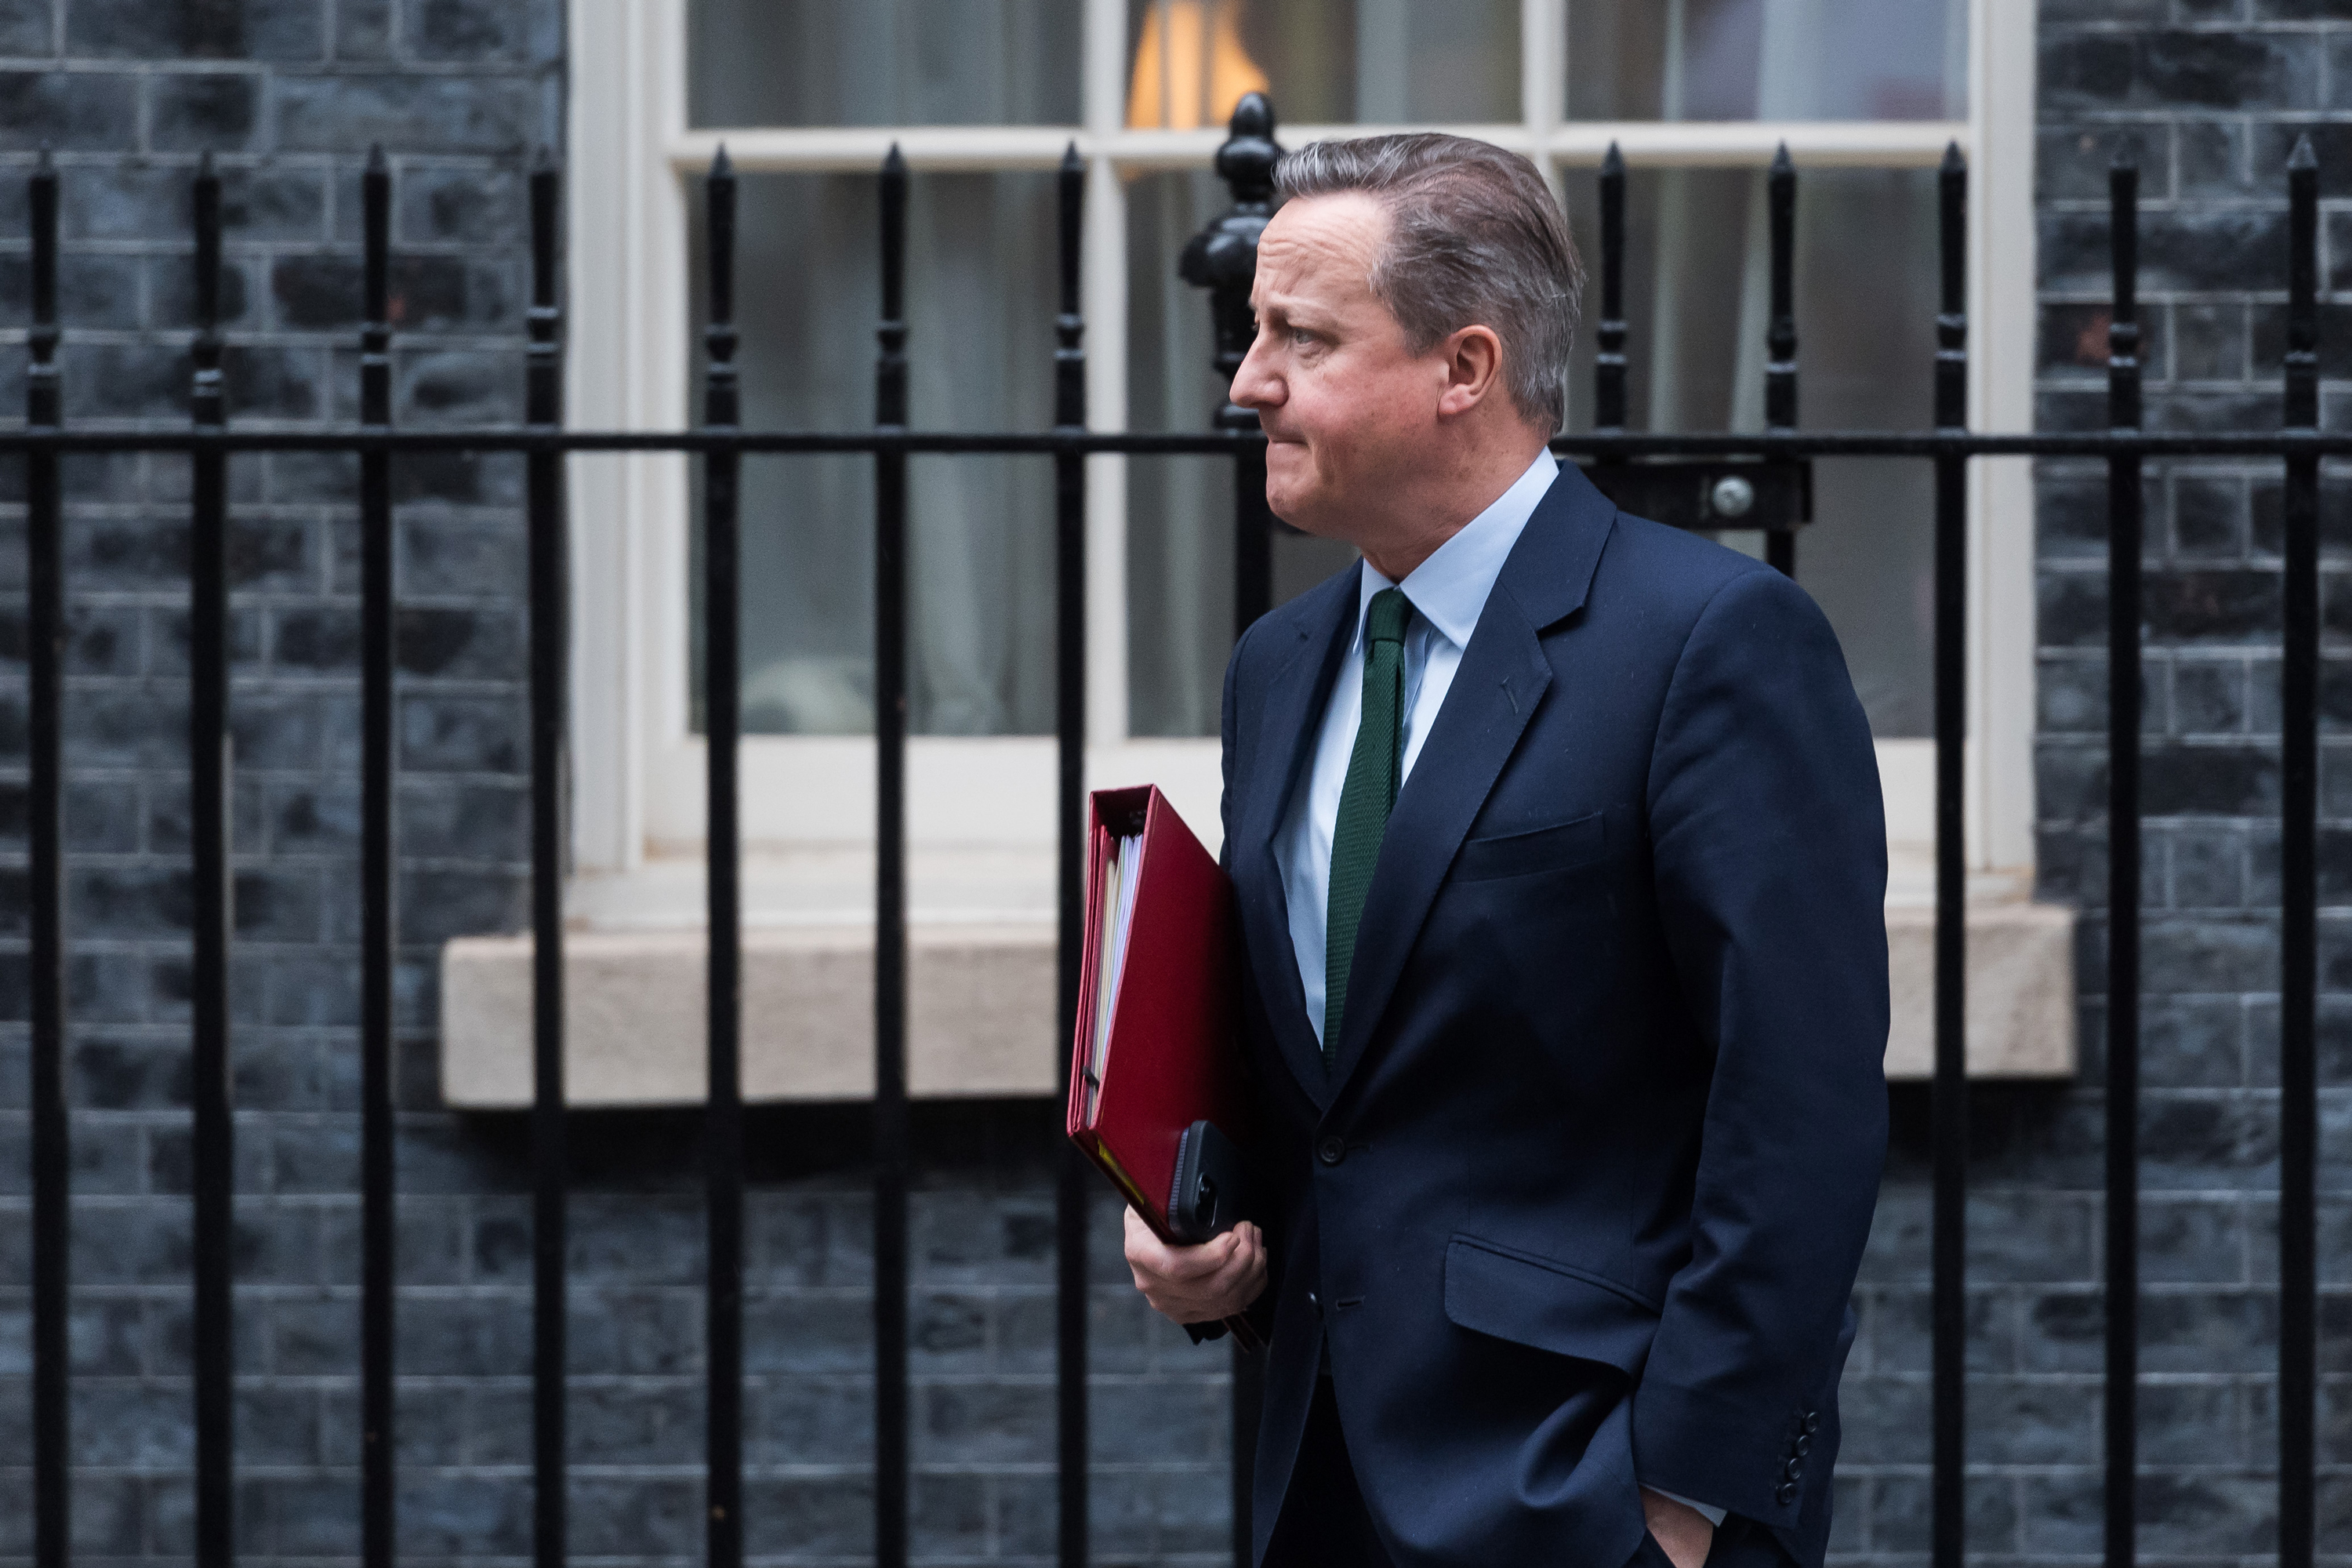 David Cameron leaves 10 Downing Street after attending the weekly Cabinet meeting in London, United Kingdom on Tuesday.